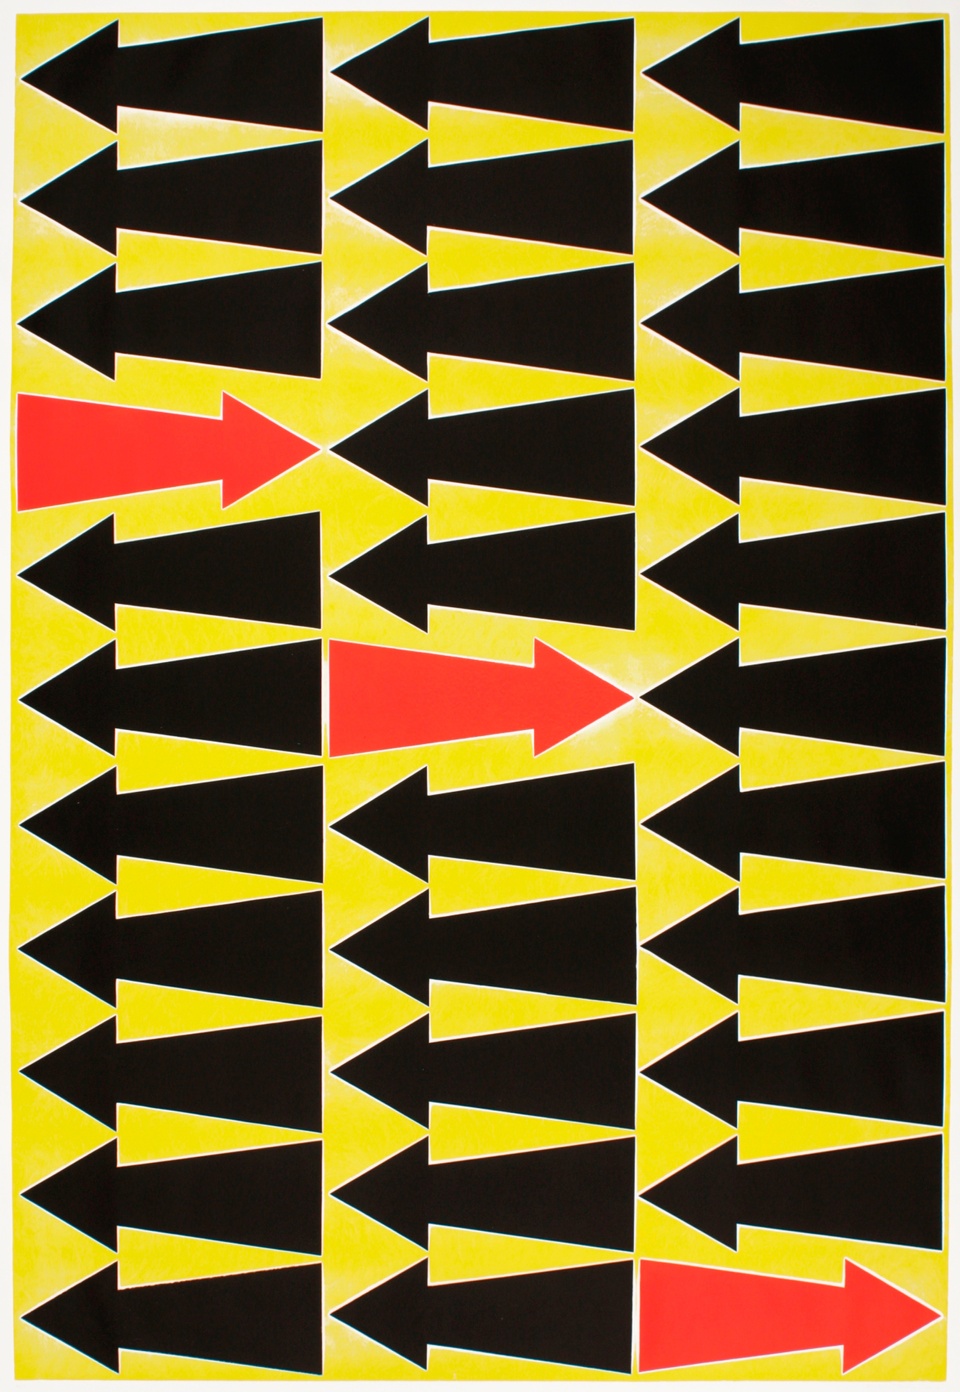 Graphic image of yellow field with many black arrows pointing left and three red arrows pointing right